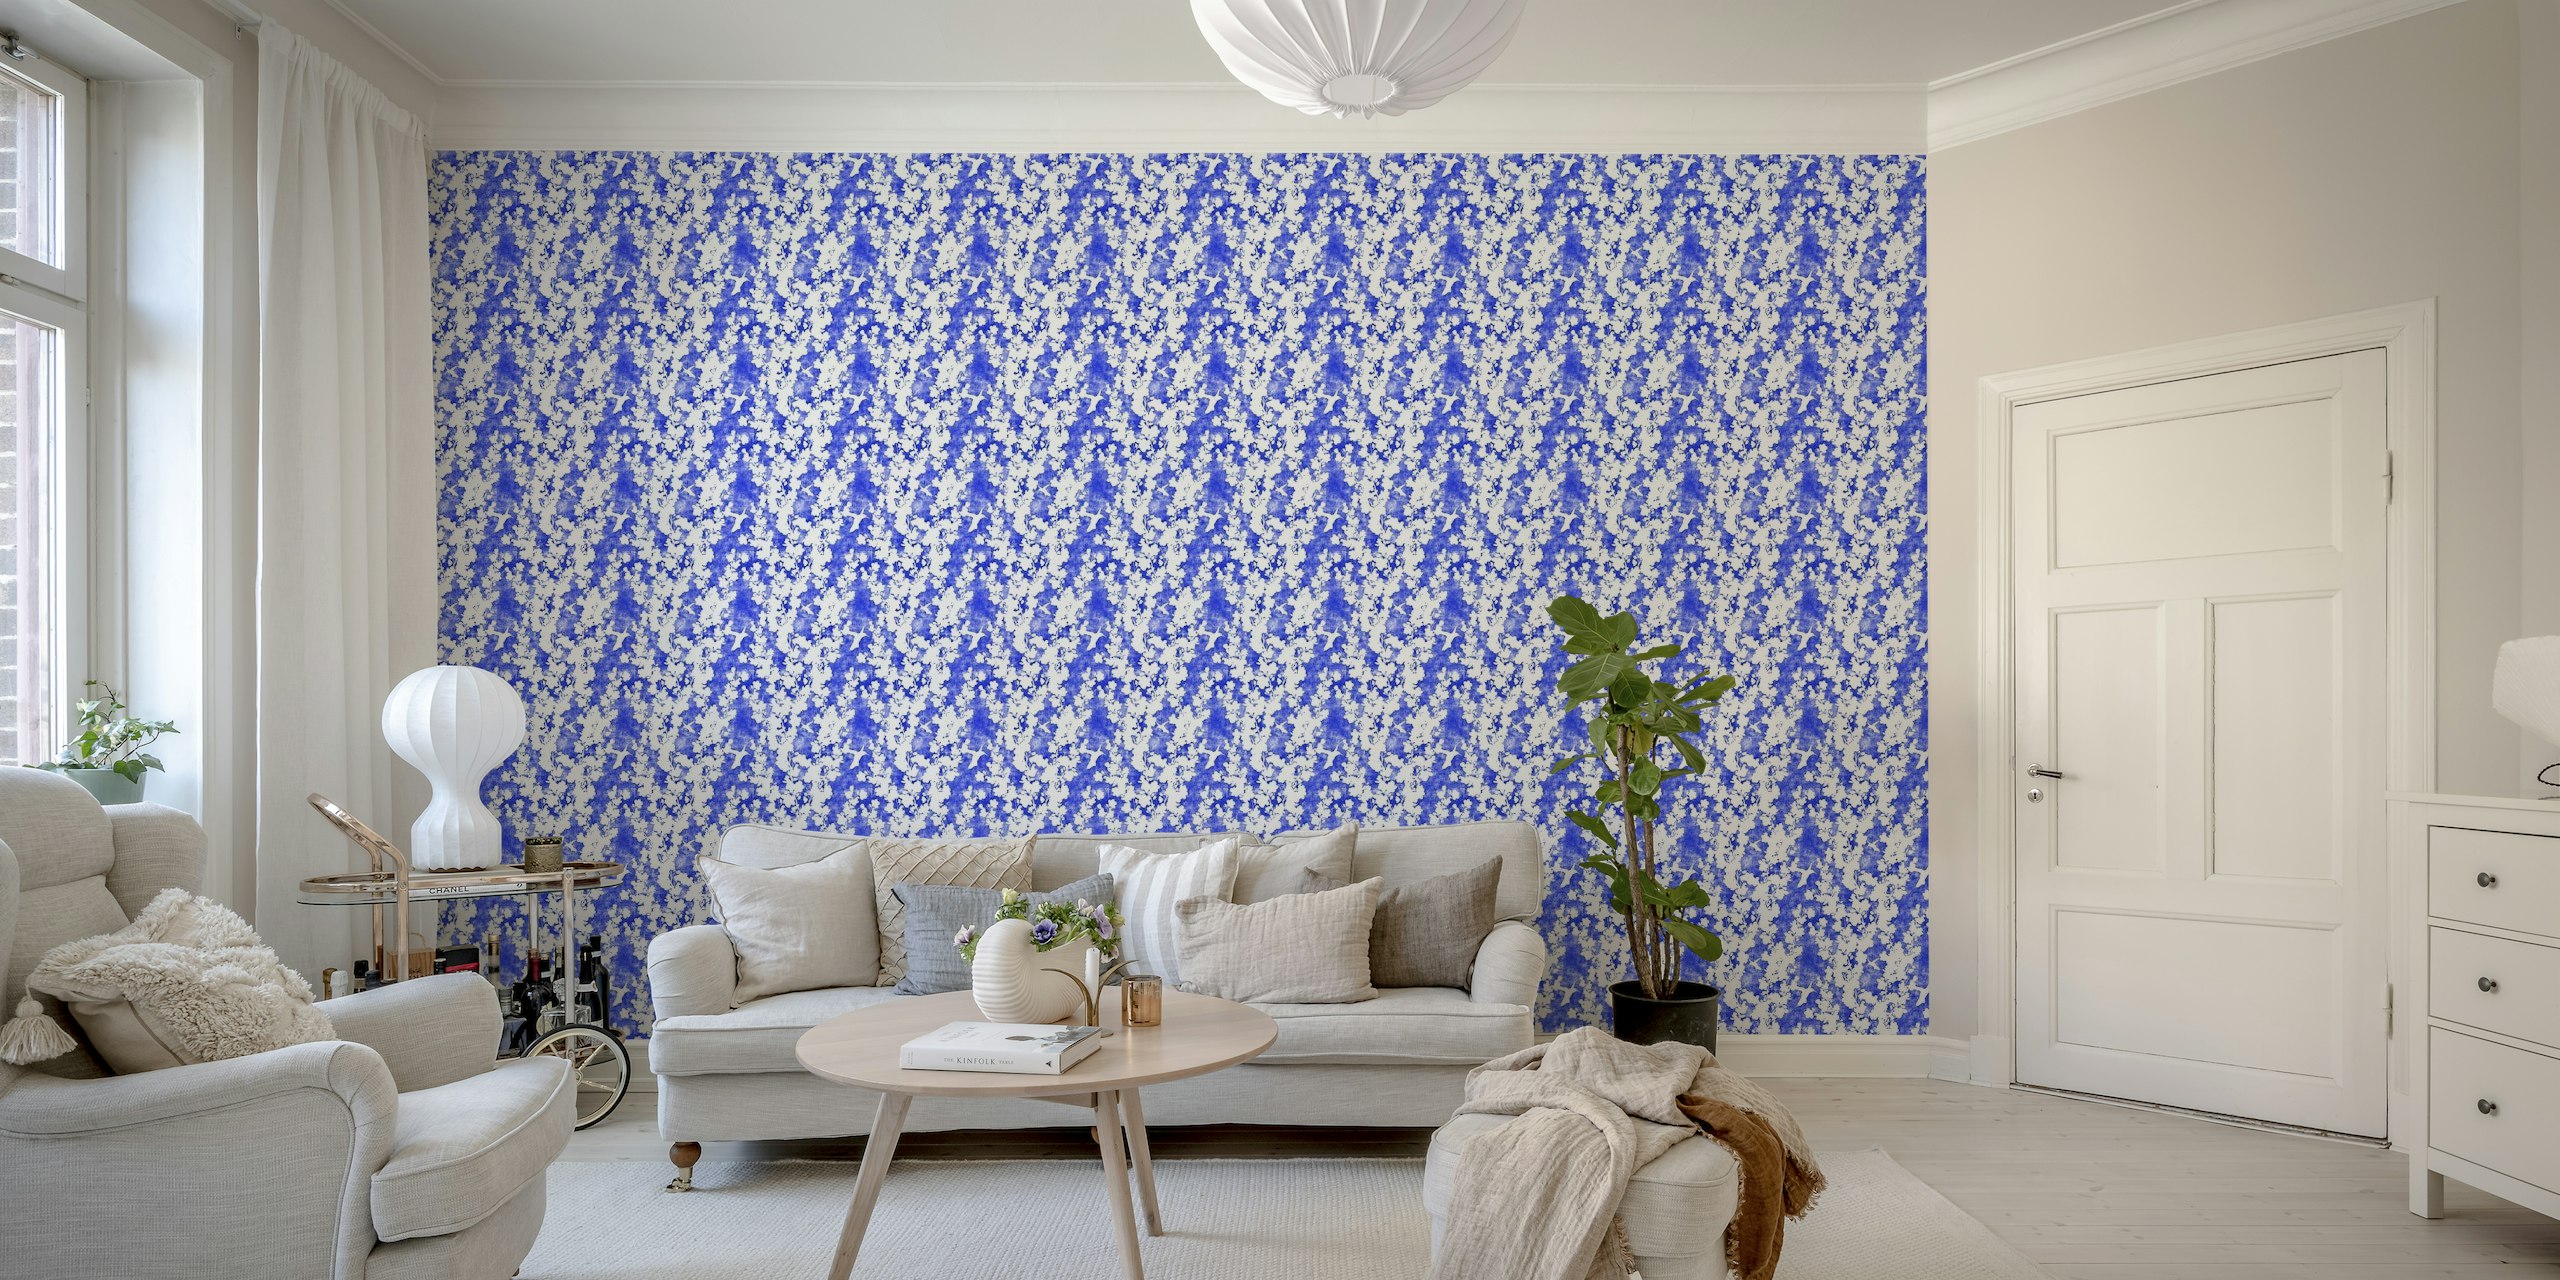 Cherry blossom silhouettes on blue behang